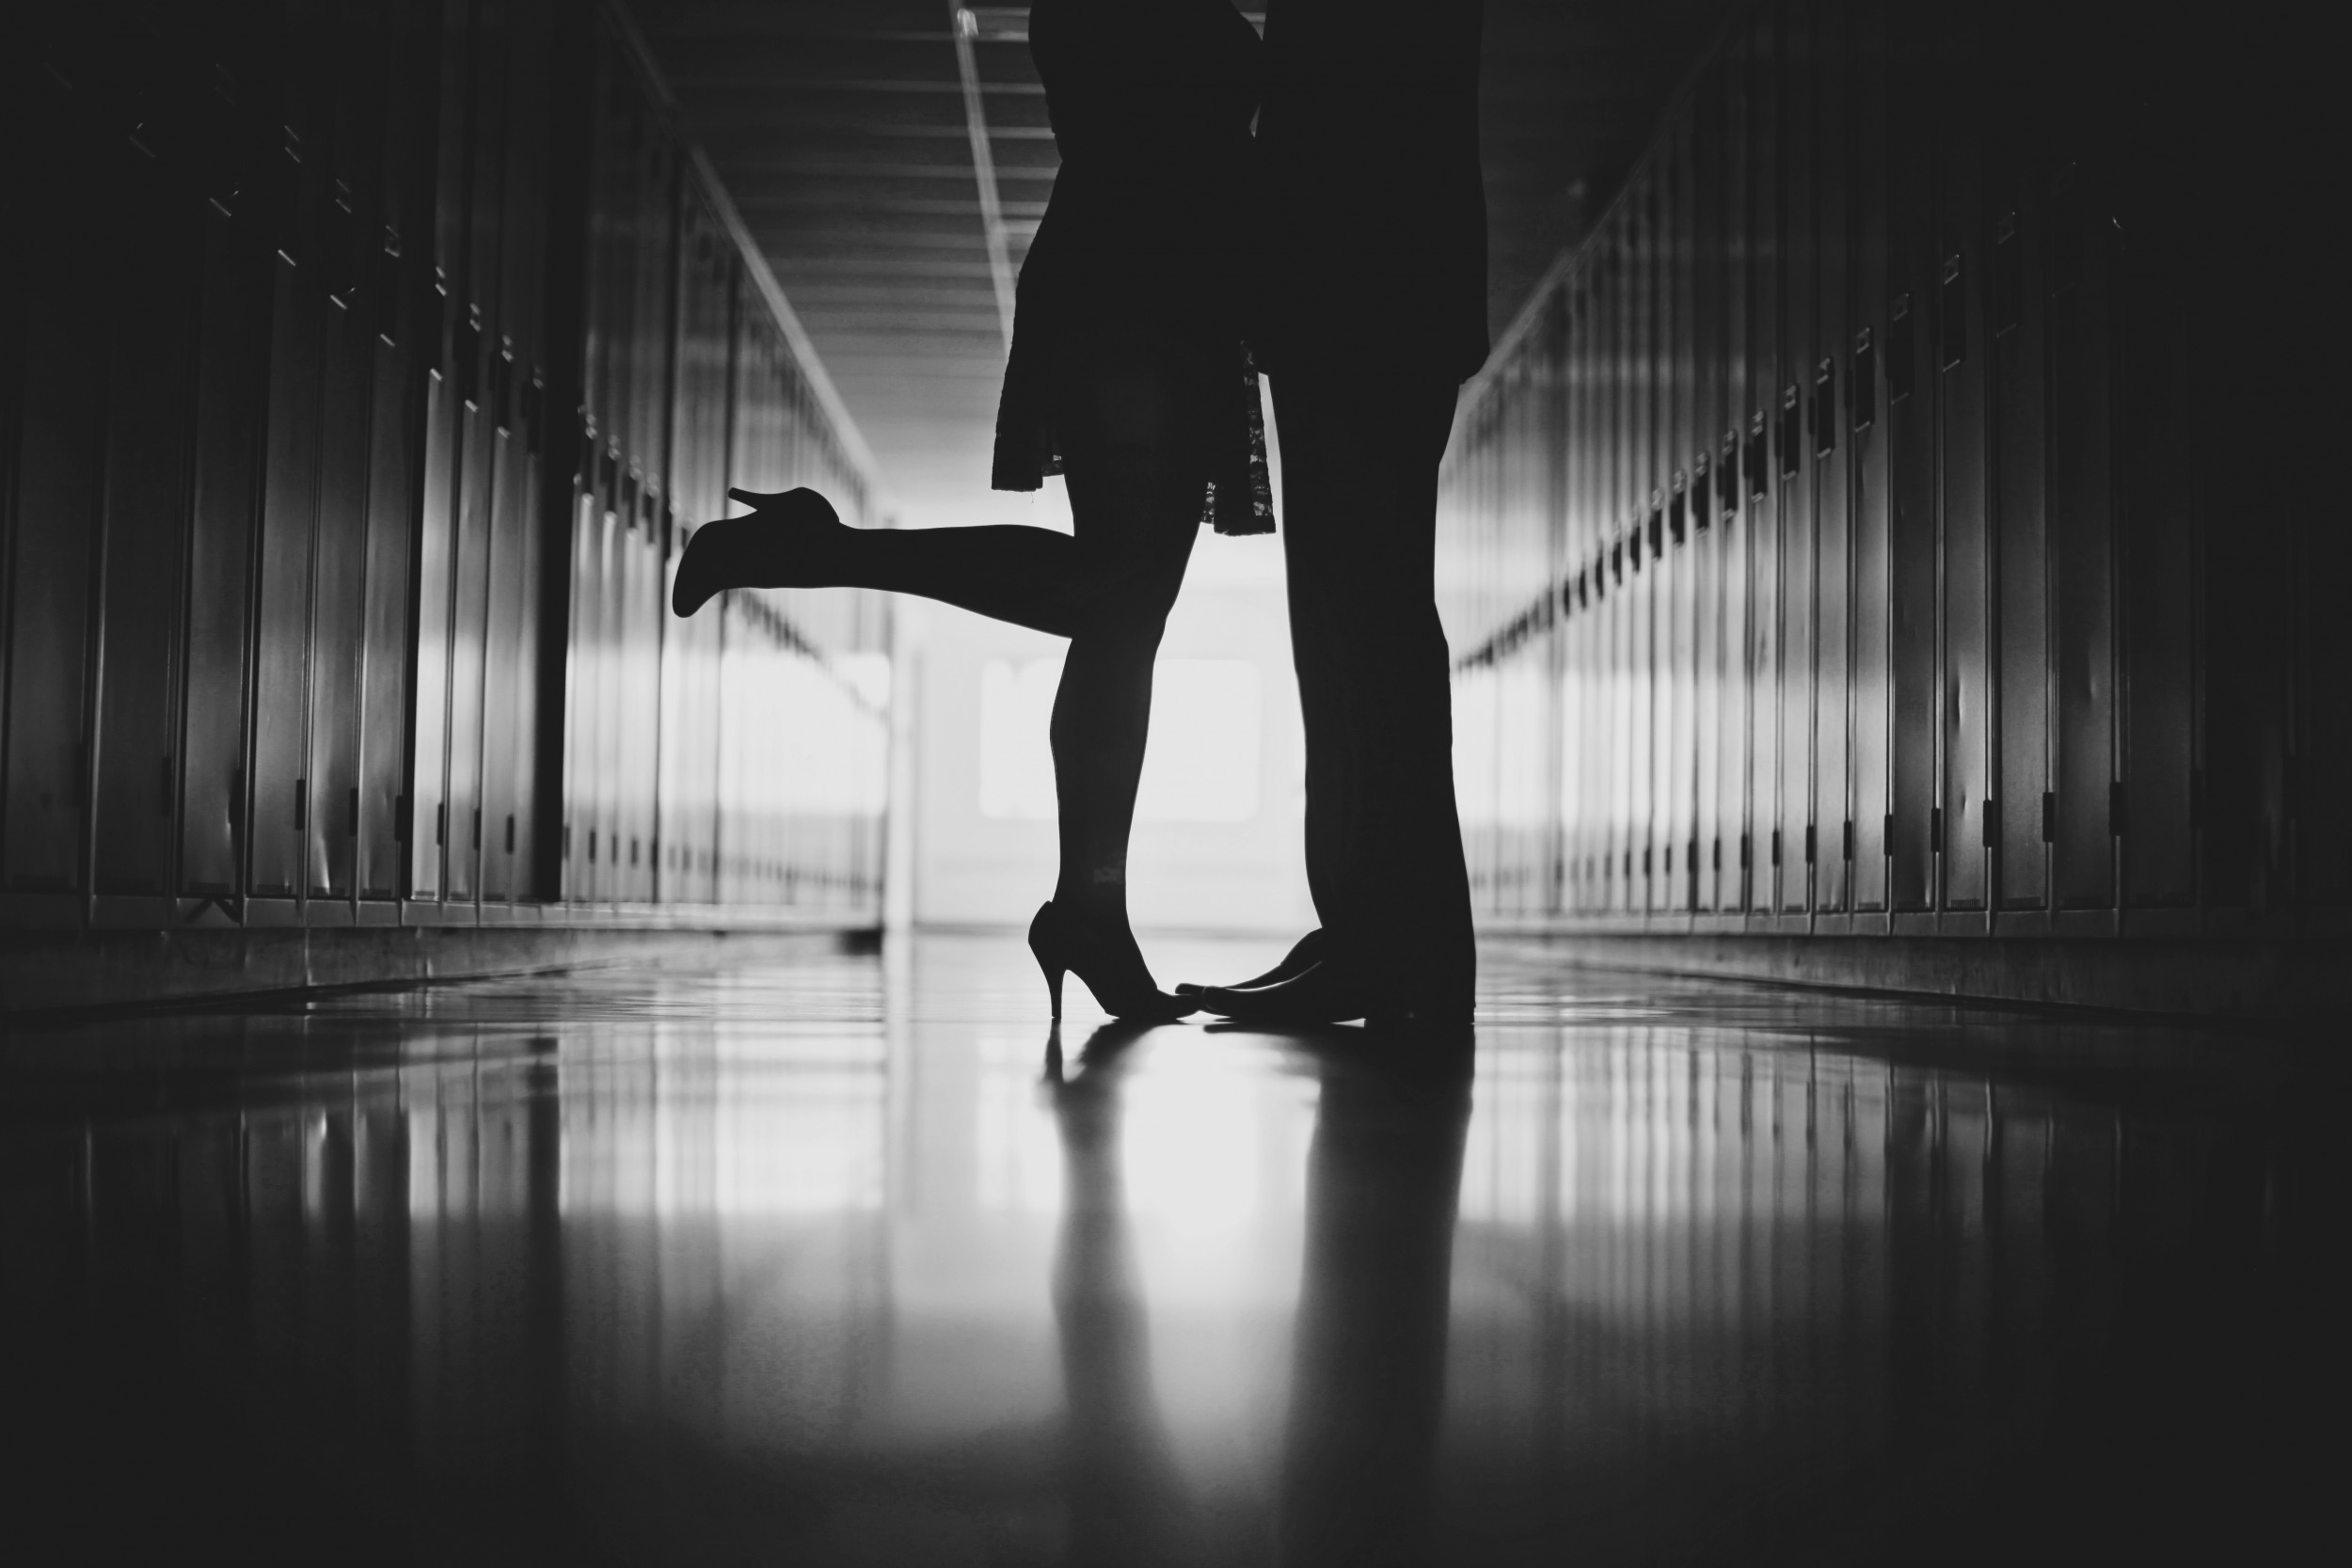 School Xxx Sex Videos Download - Video Shows Students Having Sex in Maryland Classroom, School and Police  Investigate